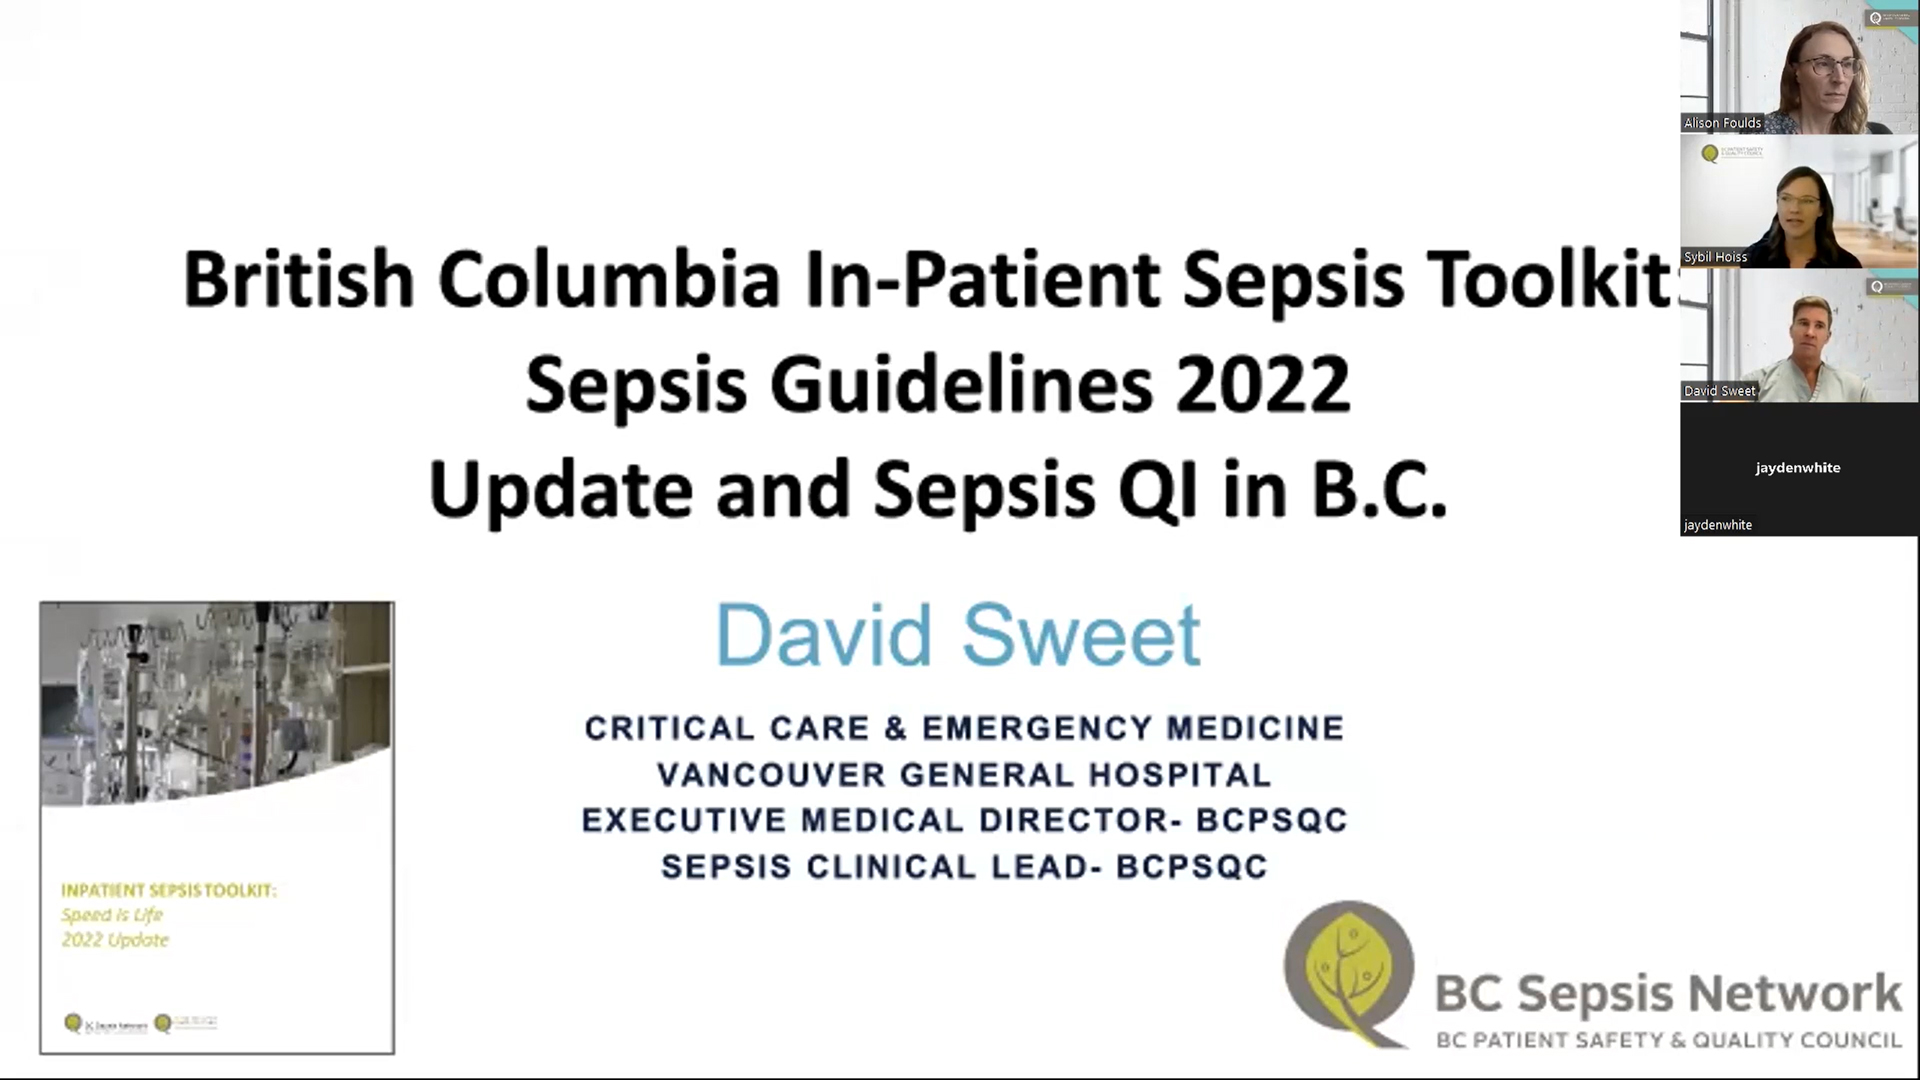 BC-In-Patient-Sepsis-Guidelines-2022-Update-Webinar-Thumbnail-001